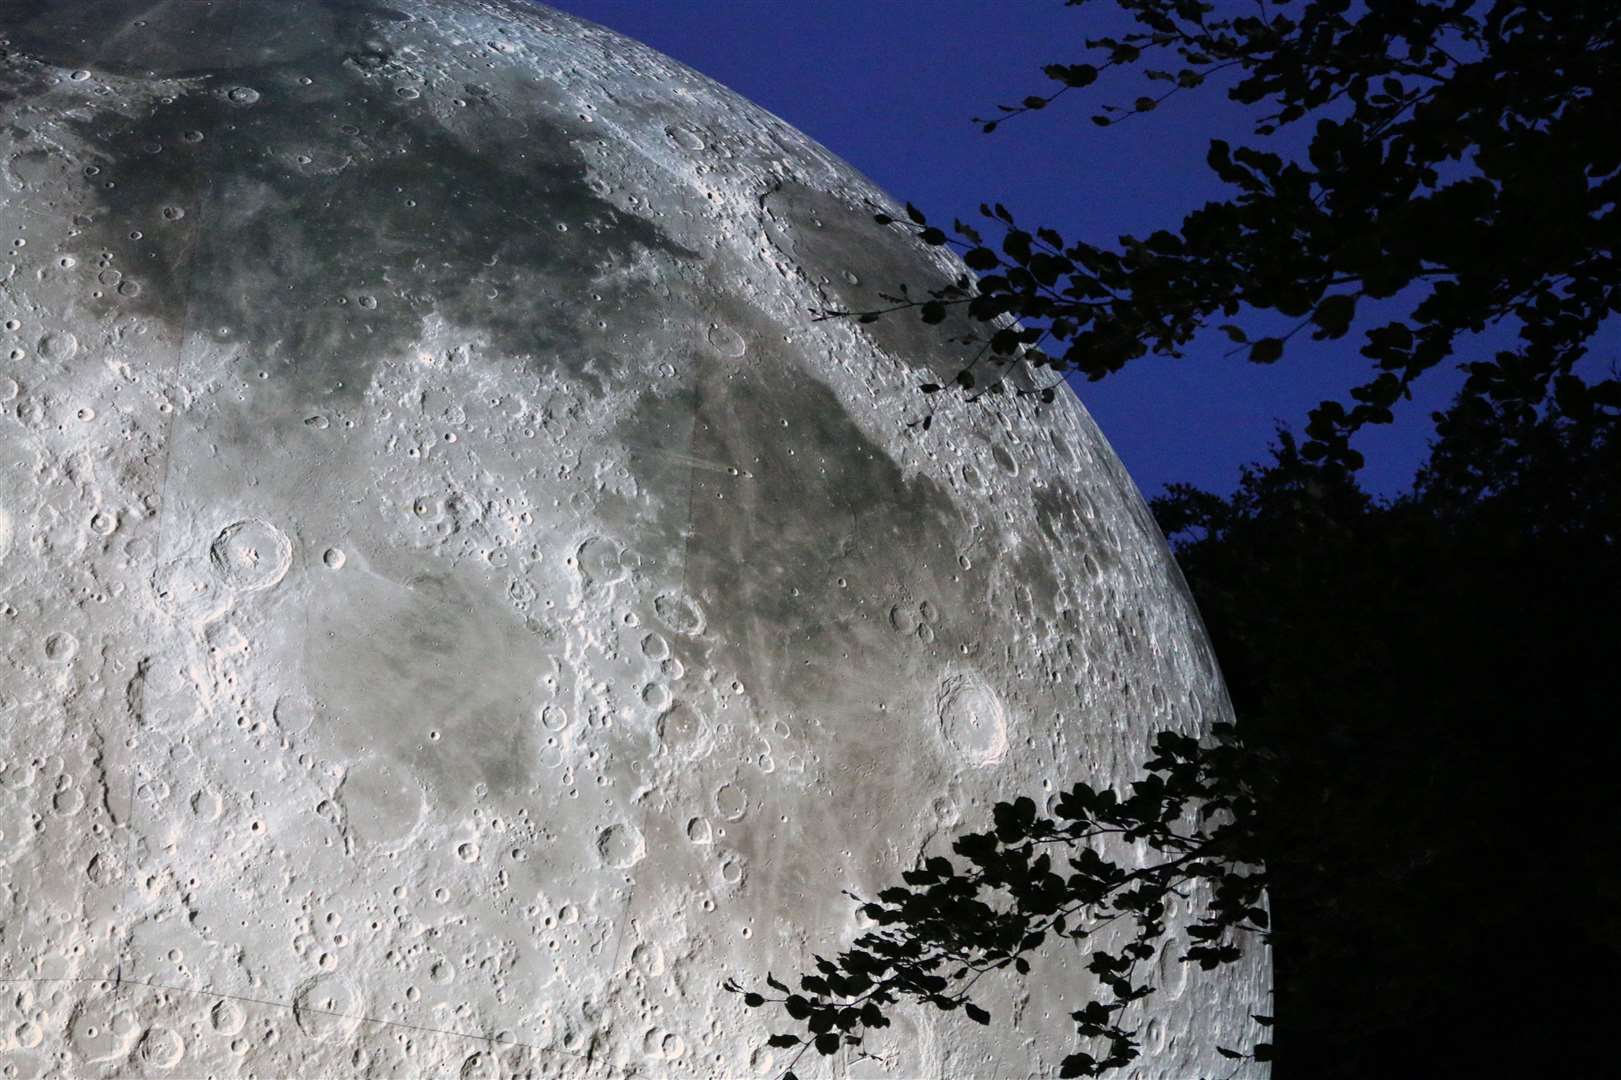 Museum of the Moon by Luke Jerram is a replica of the moon